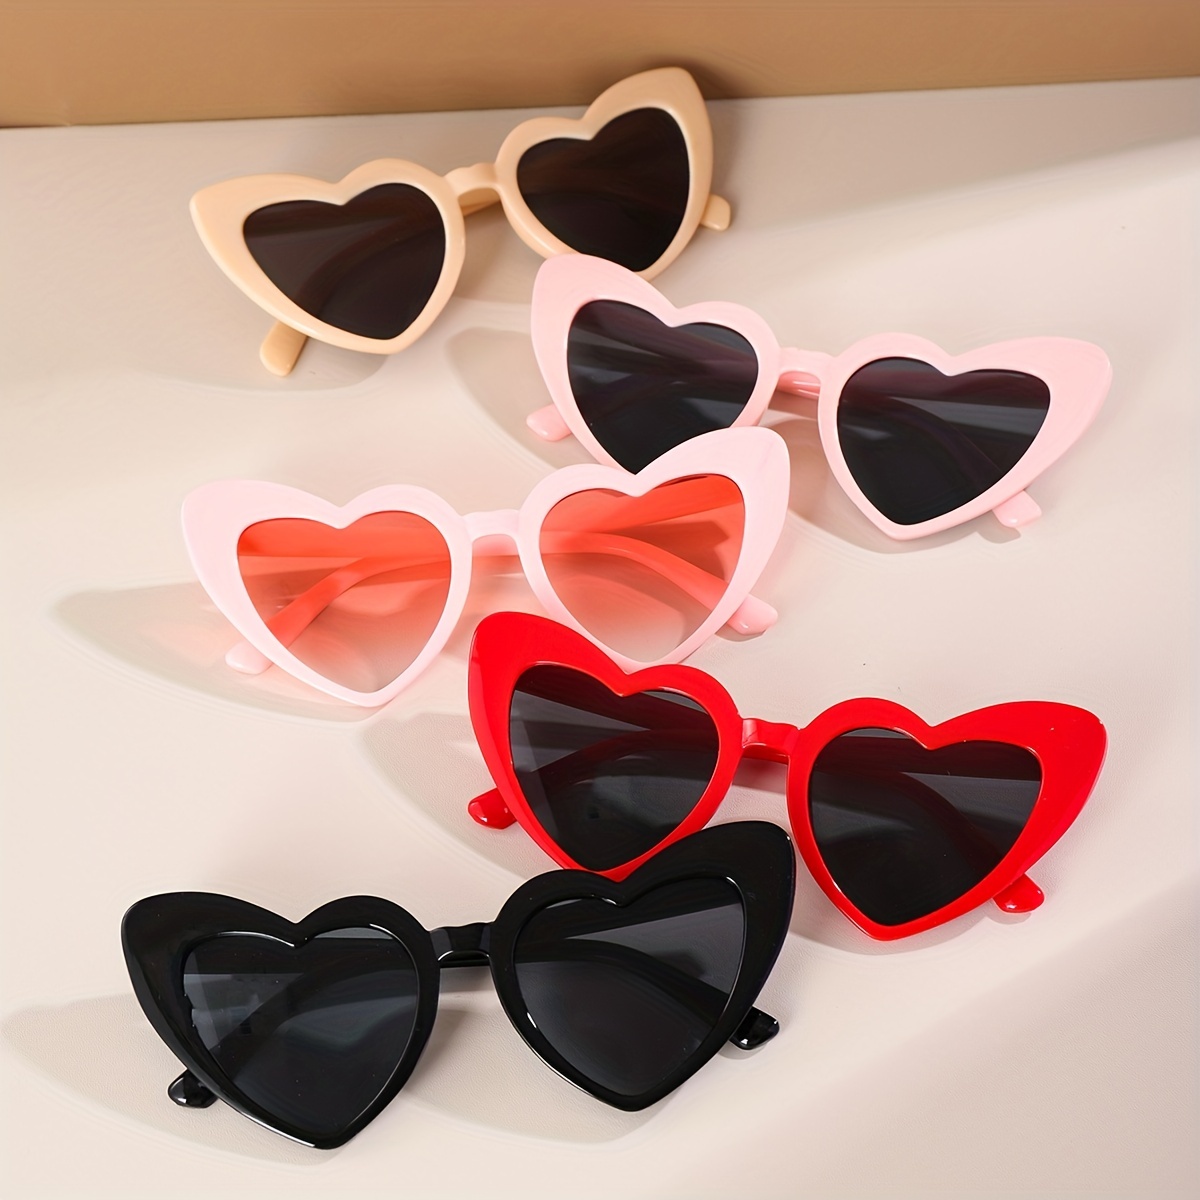 Fun, Oversized Heart Shaped Sunglasses with Metal Details for Women / 88568  Heart Throb